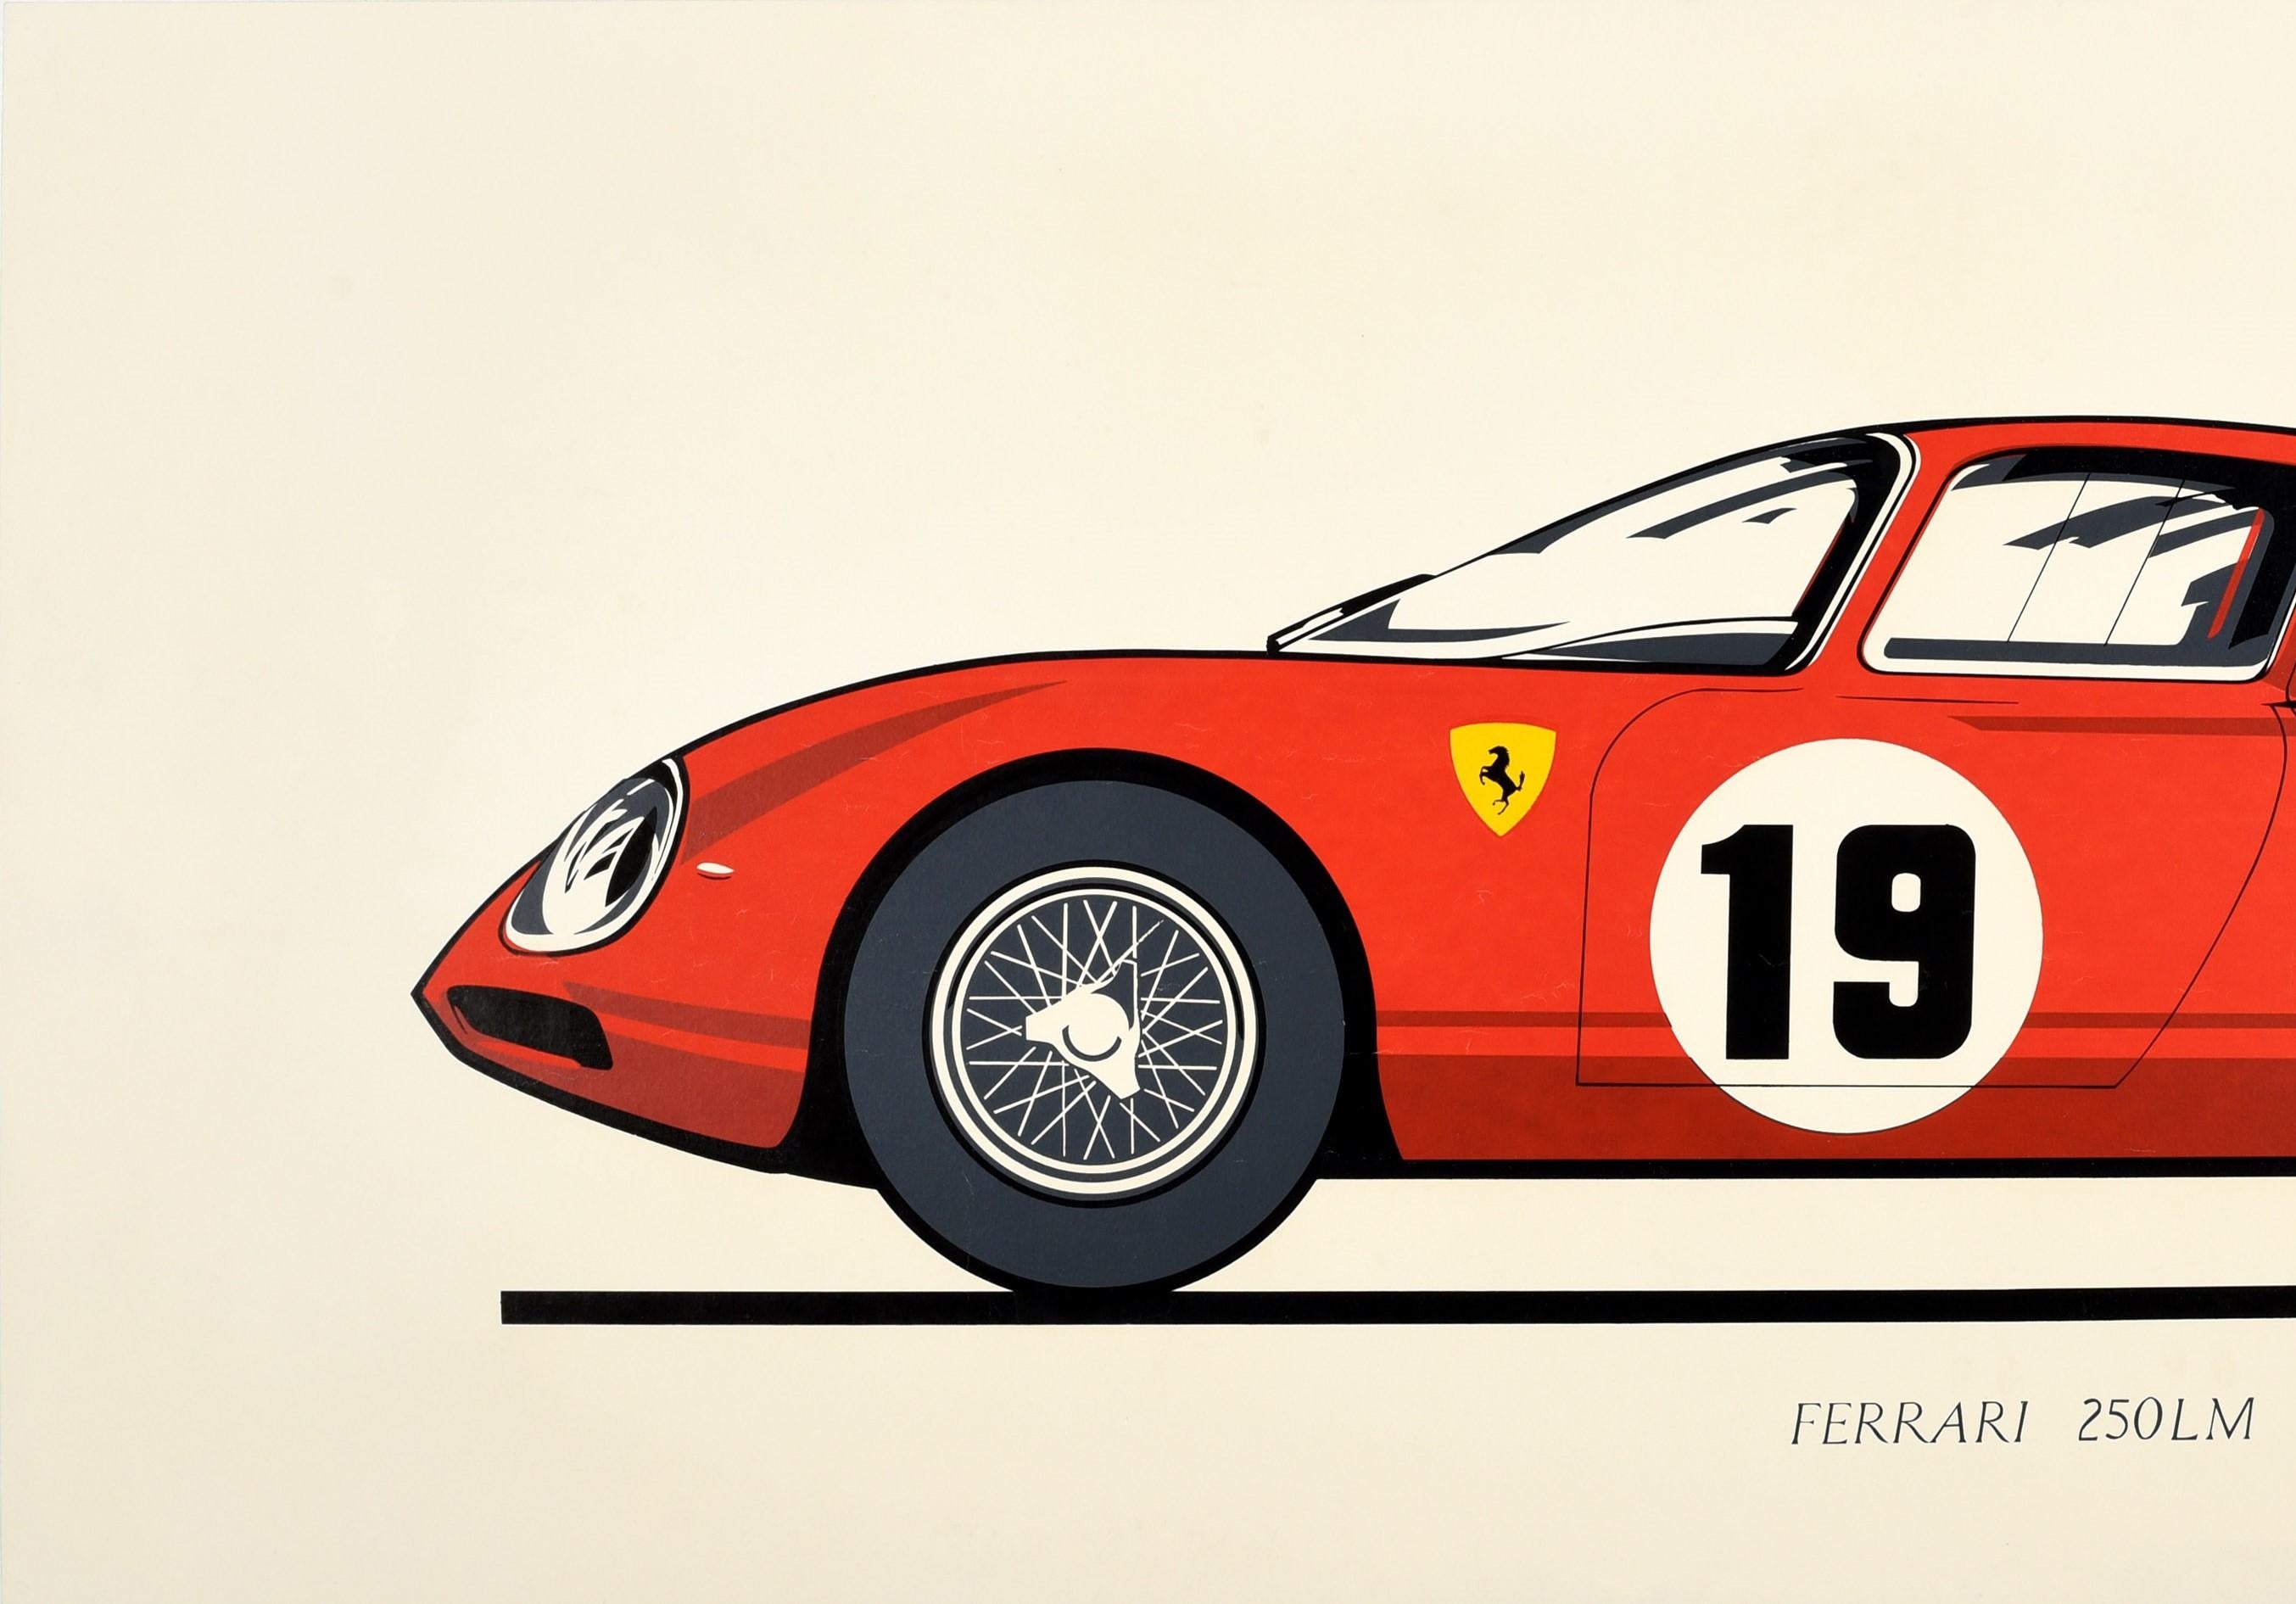 Original vintage car advertising poster for the Ferrari 250LM featuring a great side view illustration of a red Ferrari sports car with the iconic Ferrari logo of a black Cavallino Rampante / prancing horse on a yellow shield and a number 19 racing